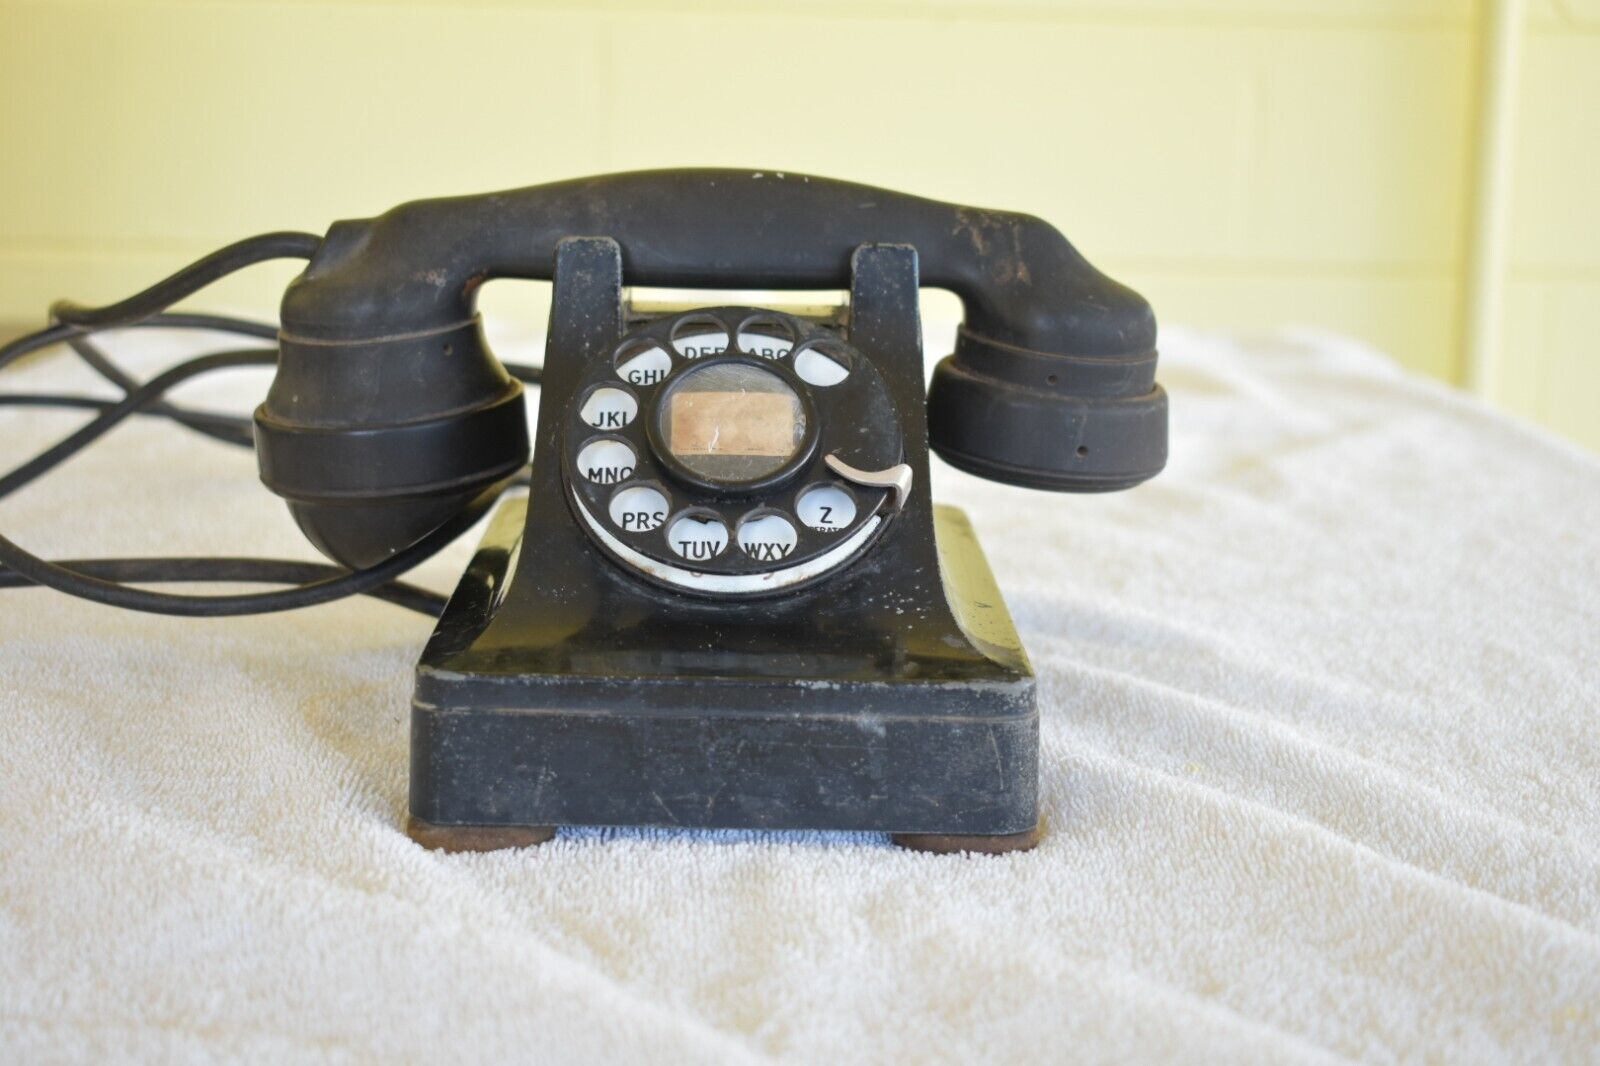 Western Electric Telephone Early Metal with 4H dial, short ears, small plungers